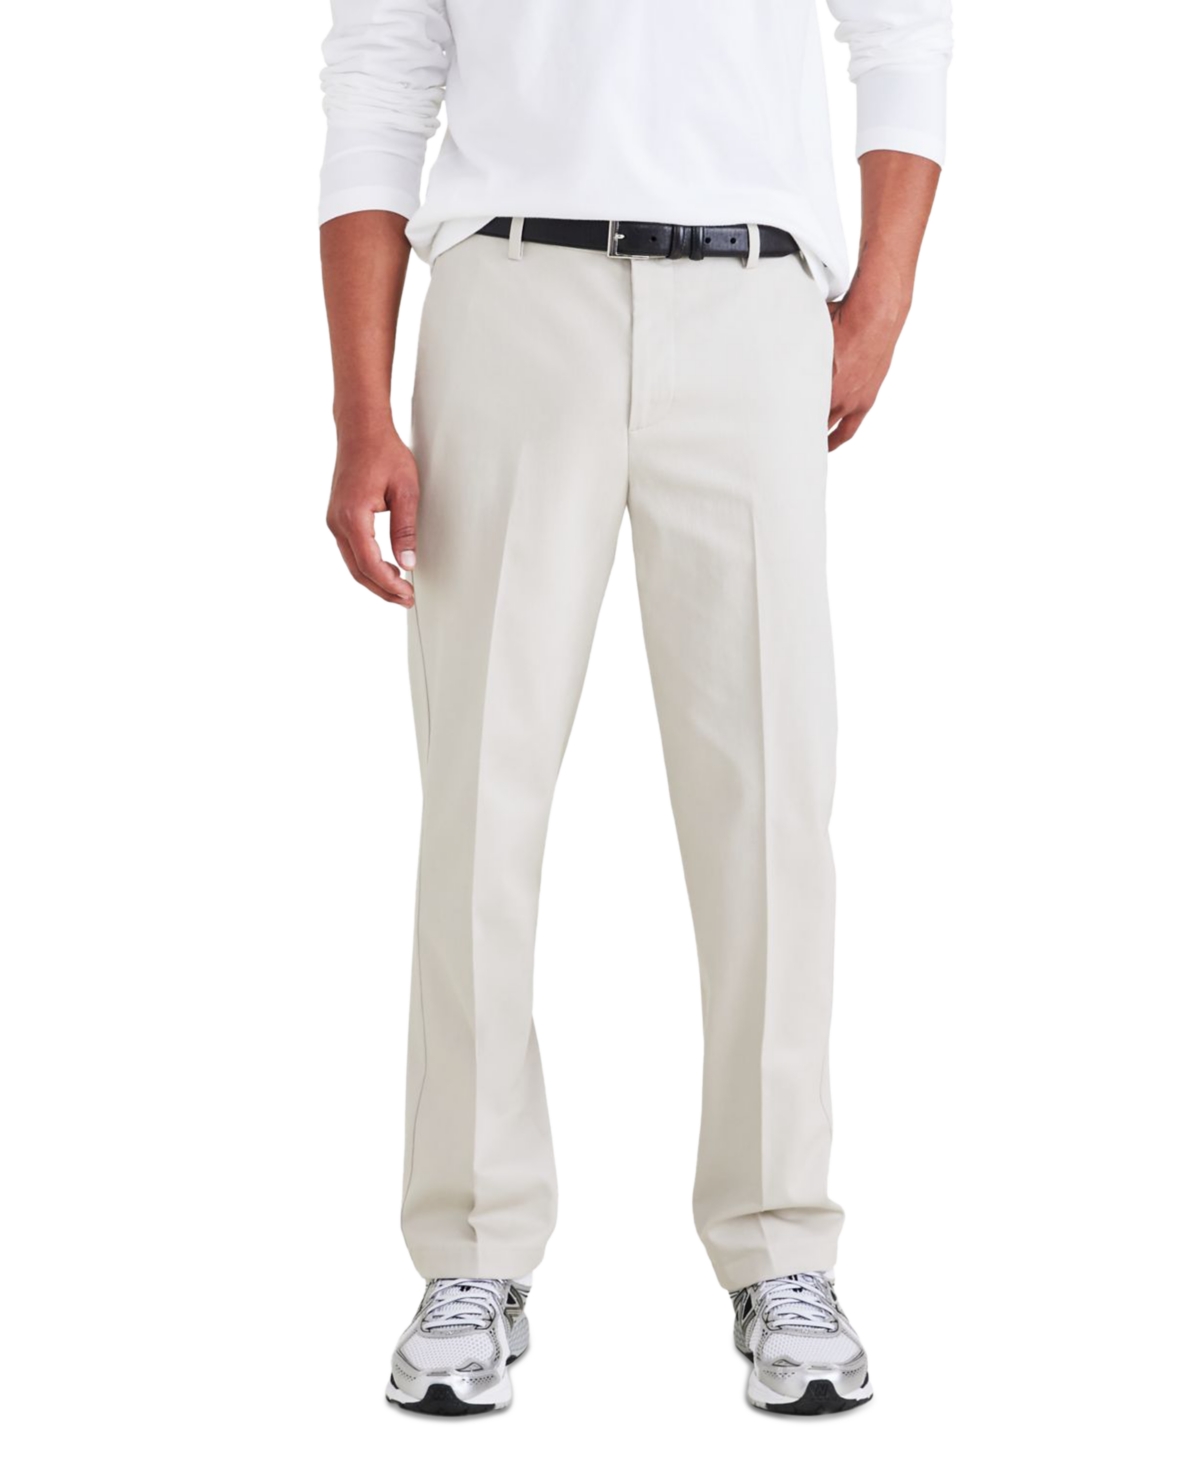 Dockers Men's Big & Tall Signature Straight Fit Iron Free Khaki Pants With Stain Defender In Cloud